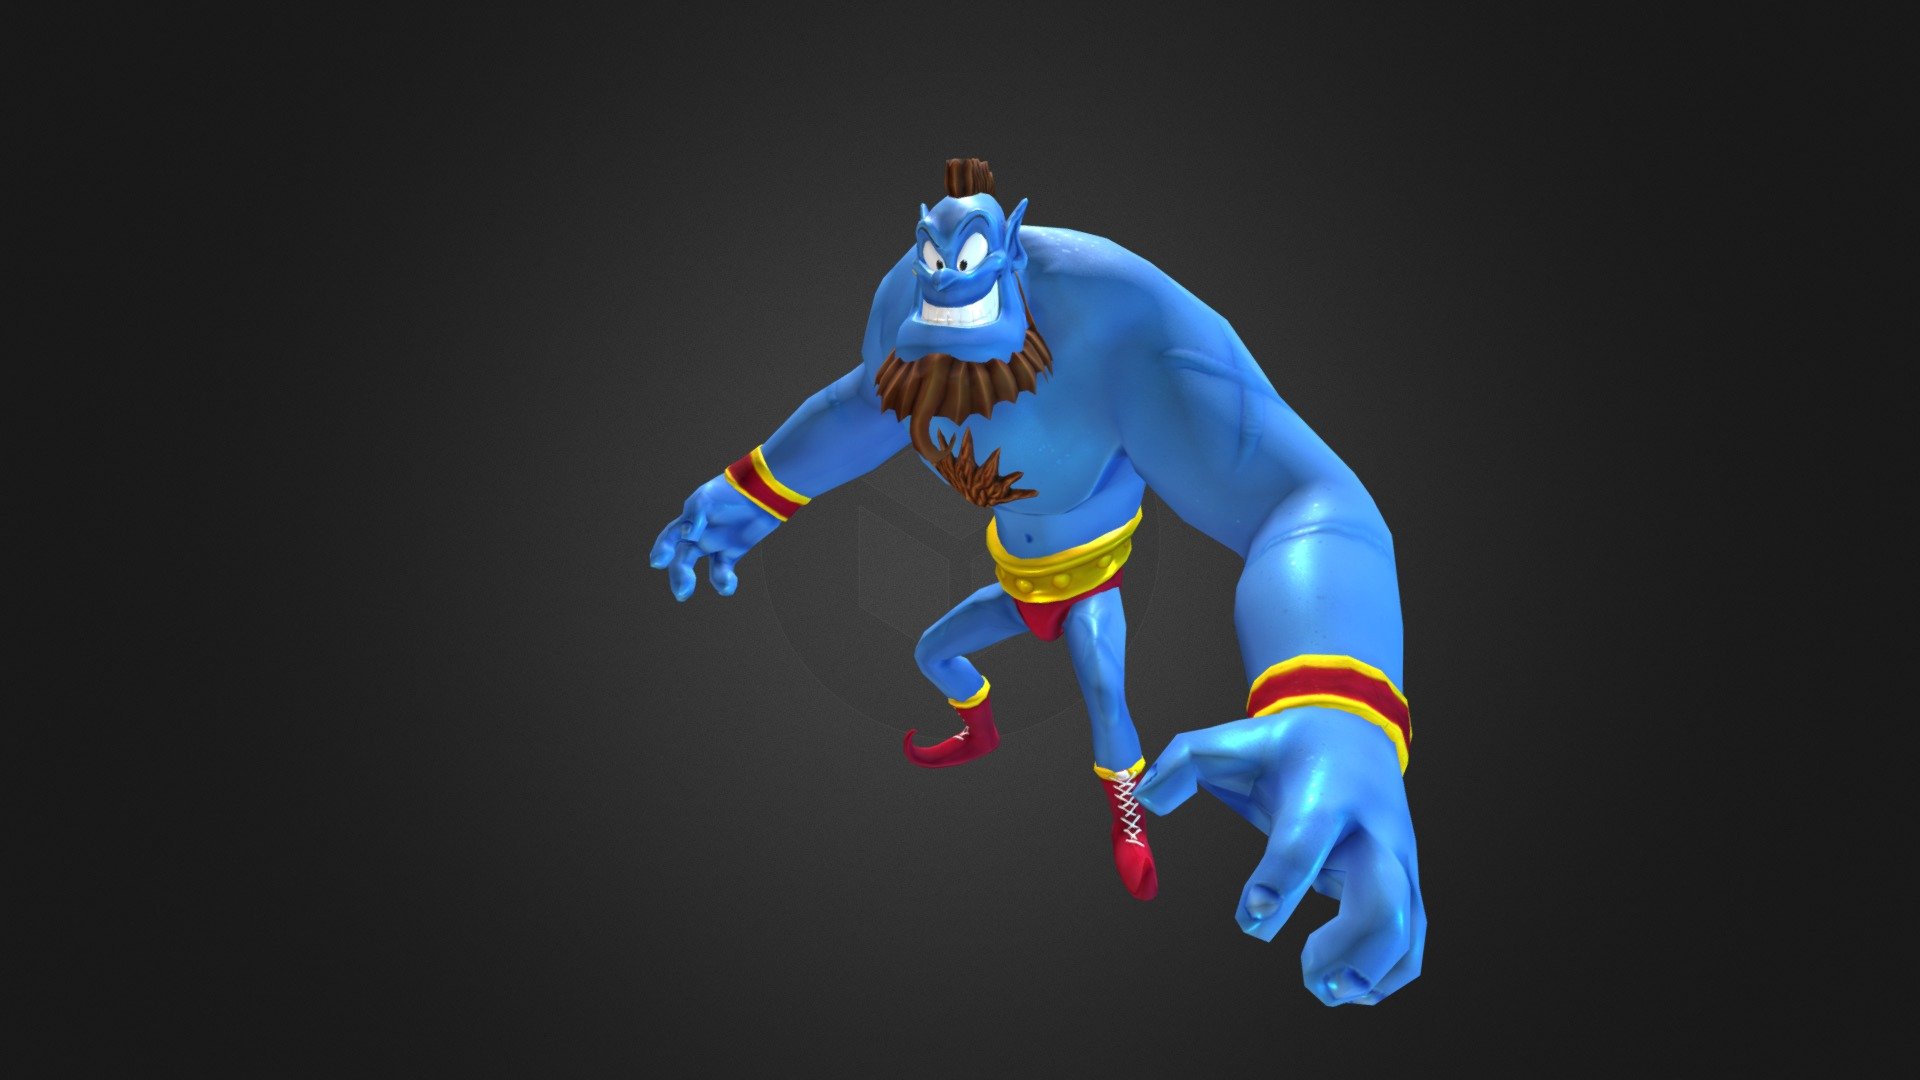 Genie of Aladin and Zangief of Street Figther mix - Genie Zangief Disney StreetFigther Challenge - 3D model by necros58 3d model